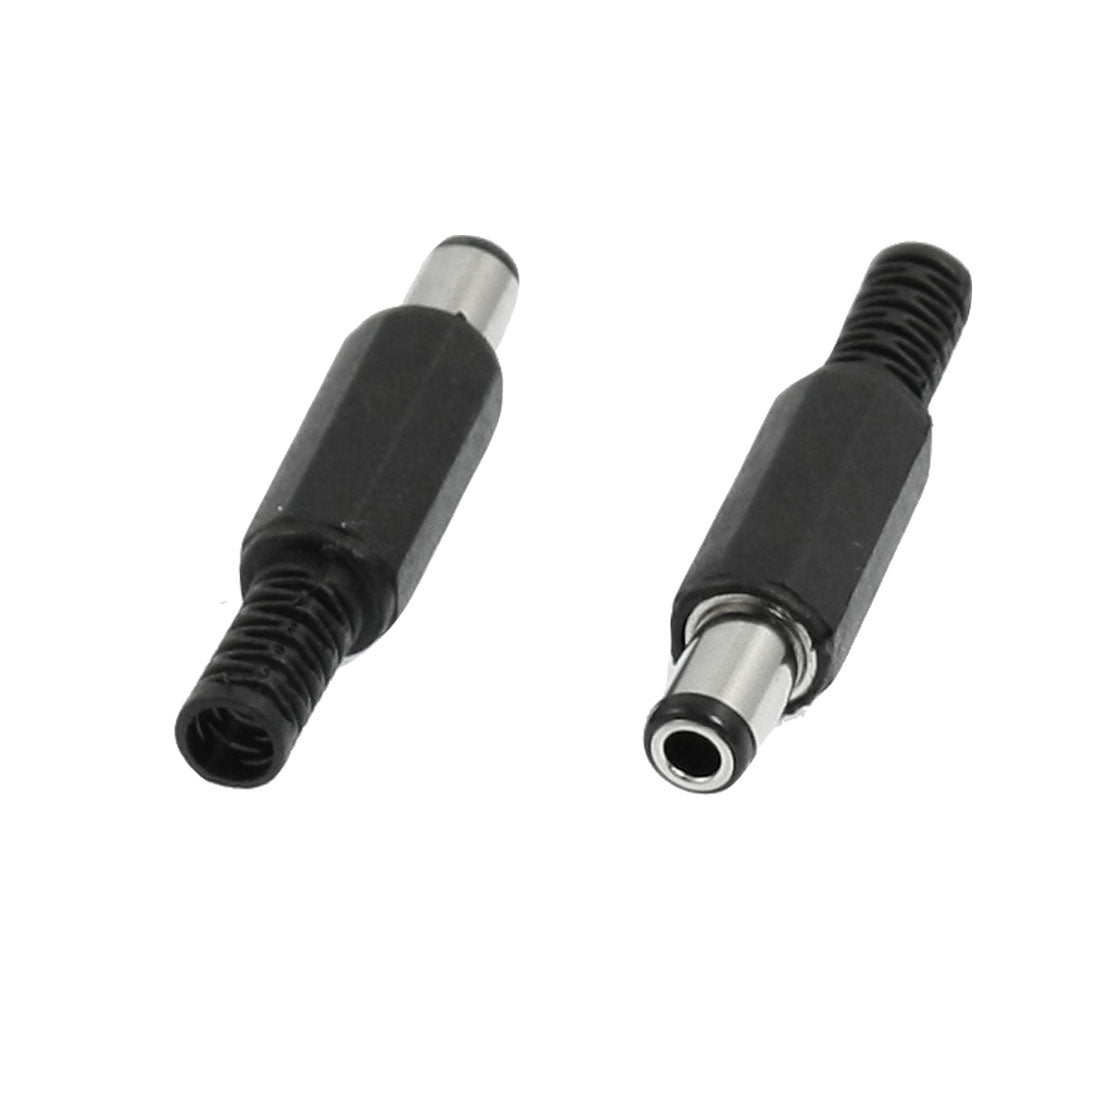 uxcell Uxcell 2 Pcs Black Plastic Cover 3x6.2mm Male DC Power Jack Connector